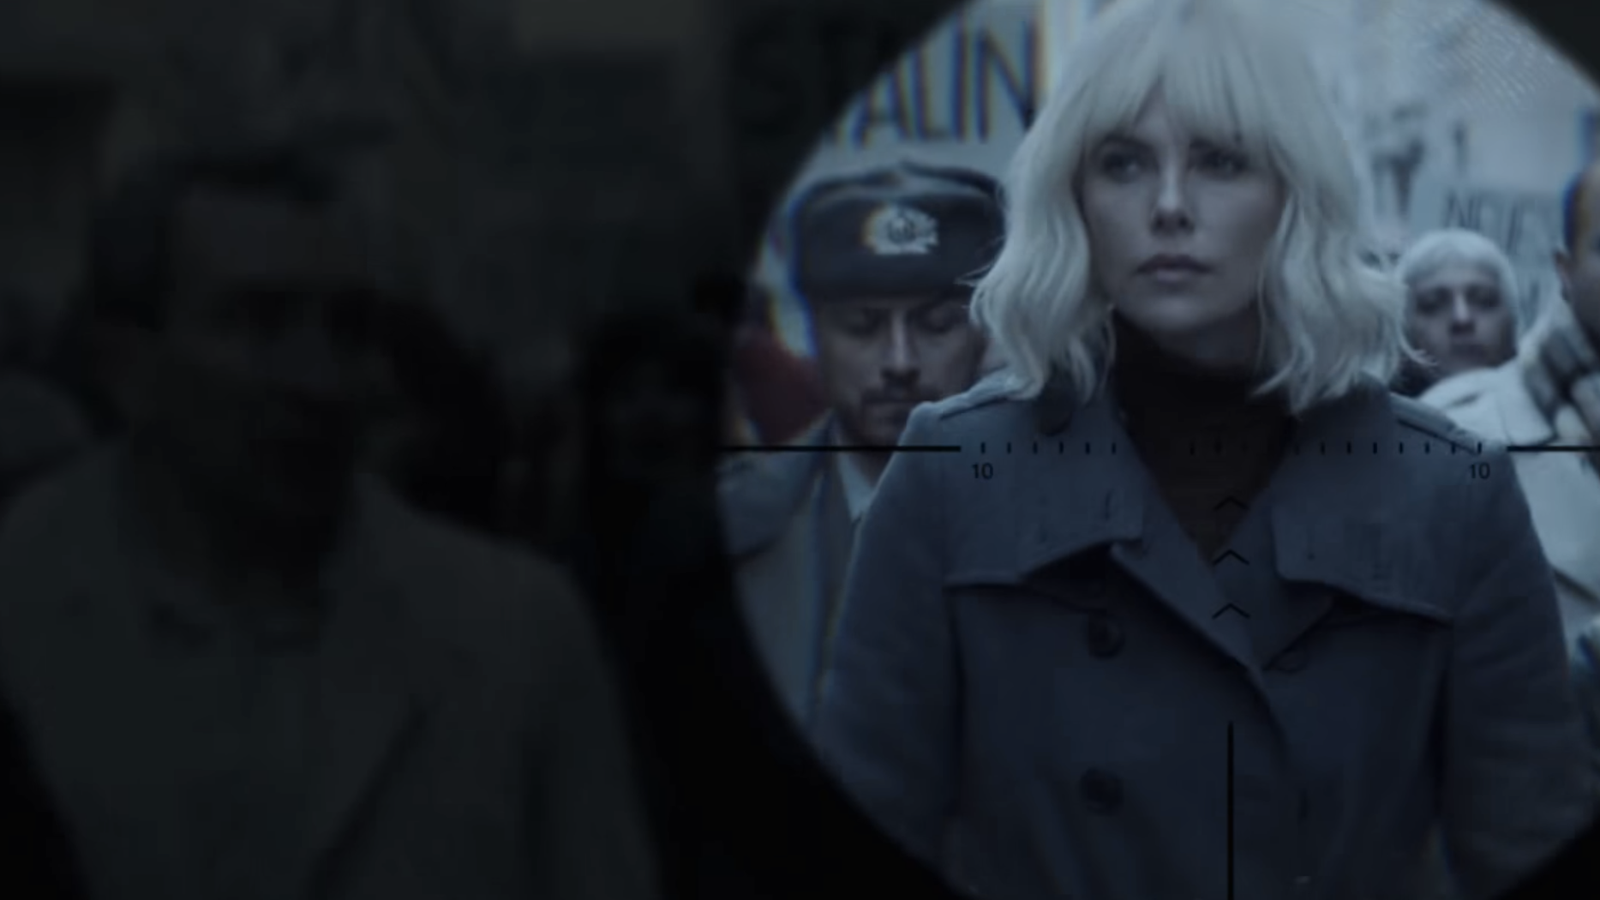 Charlize Theron Goes Deadlier in Atomic Blonde New Trailer